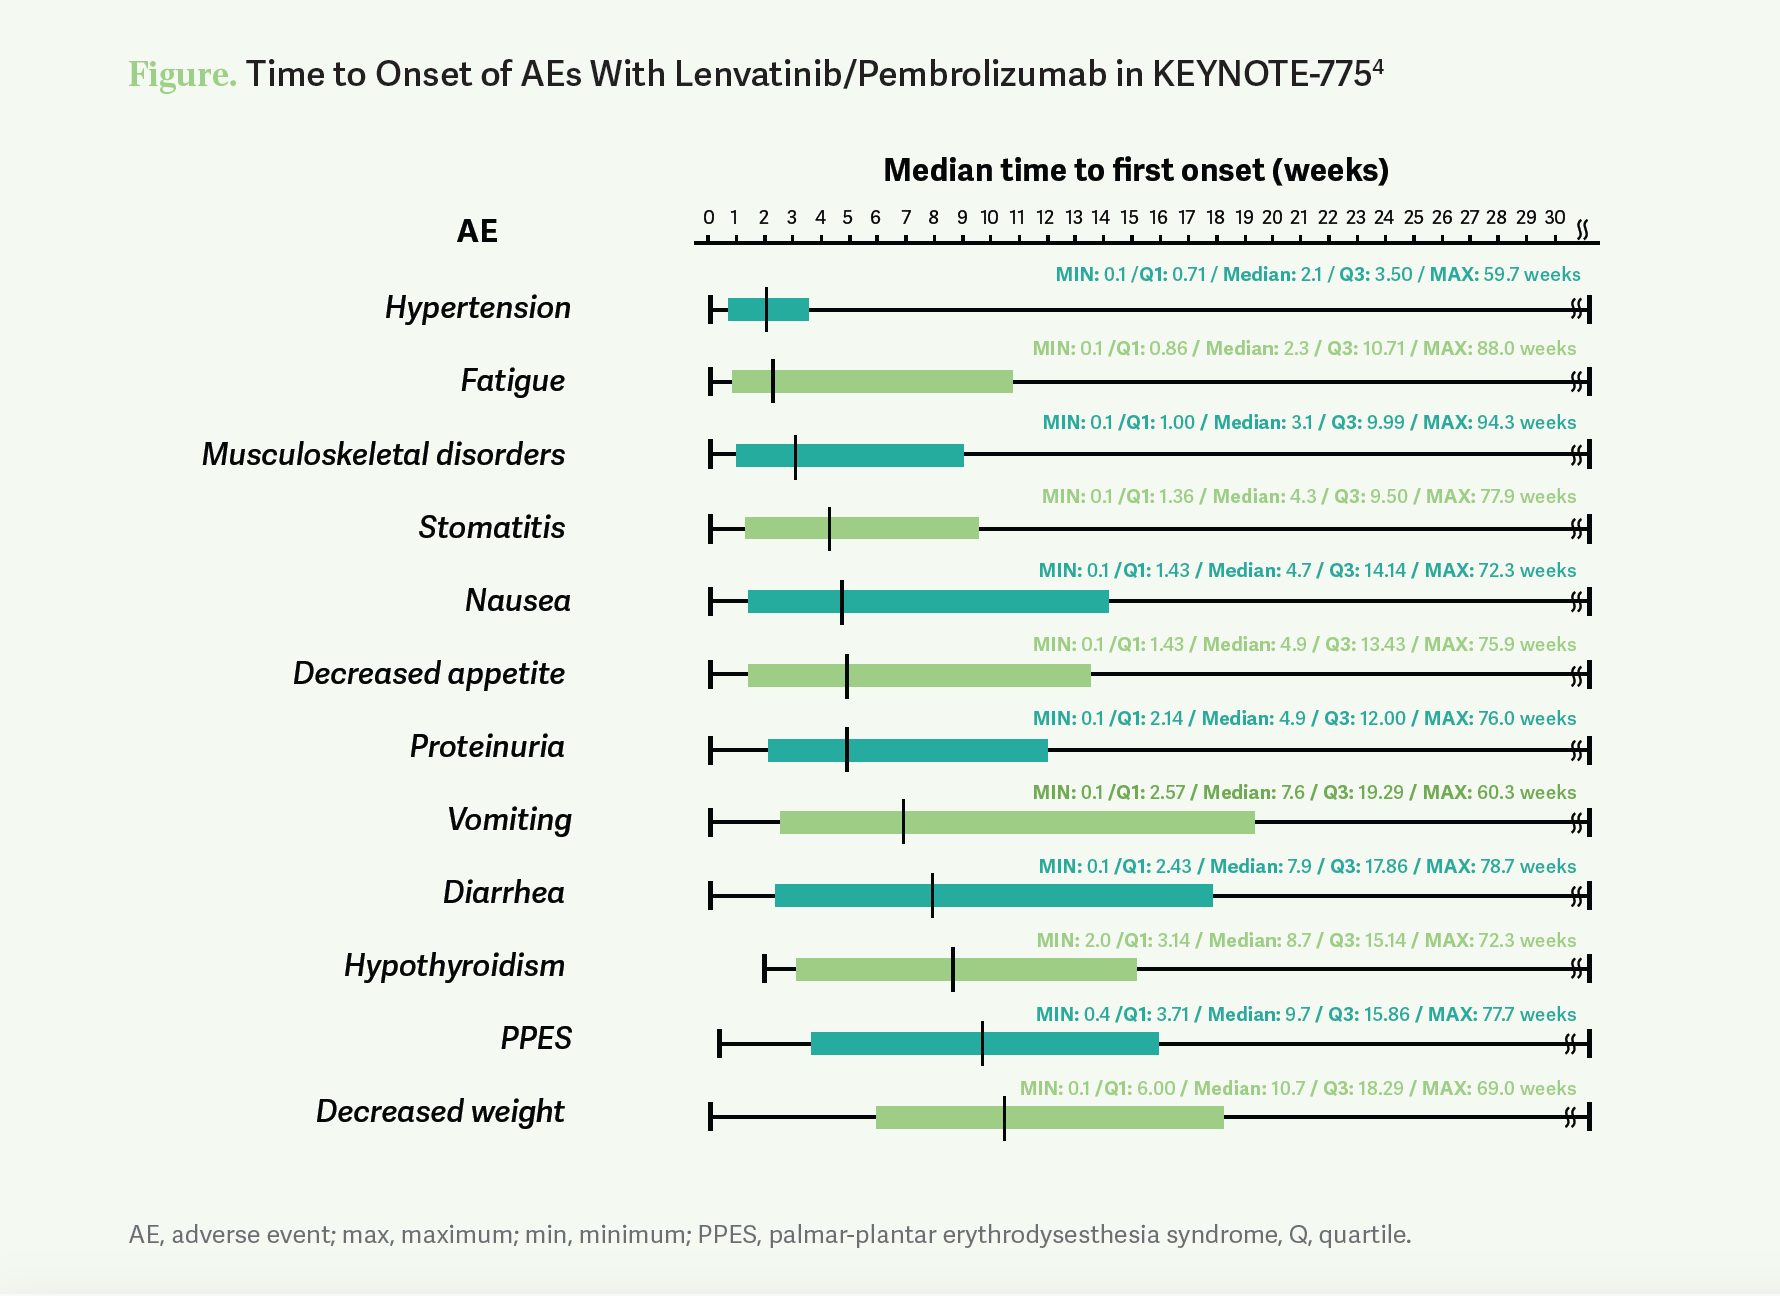 Time to Onset of AEs With Lenvatinib/Pembrolizumab in KEYNOTE-775